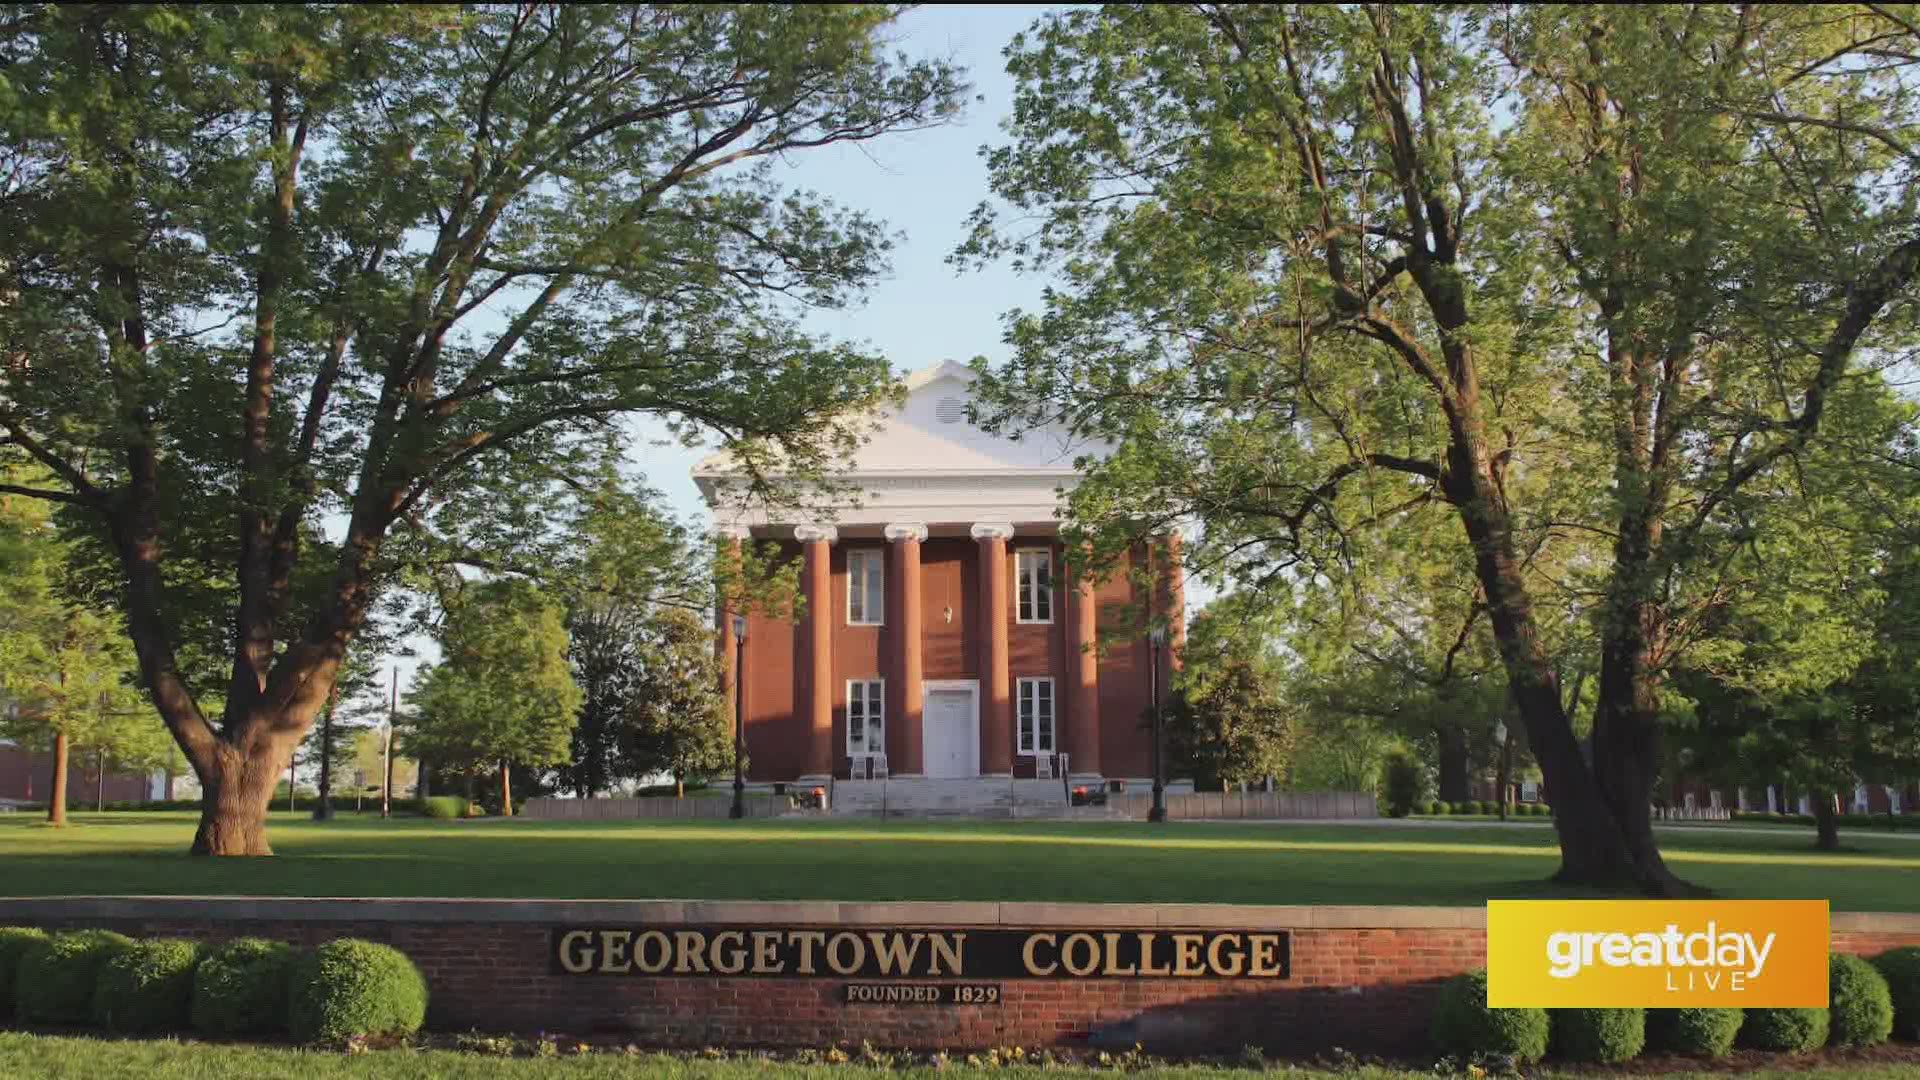 For more information, visit georgetowncollege.edu or call 502-863-8000.